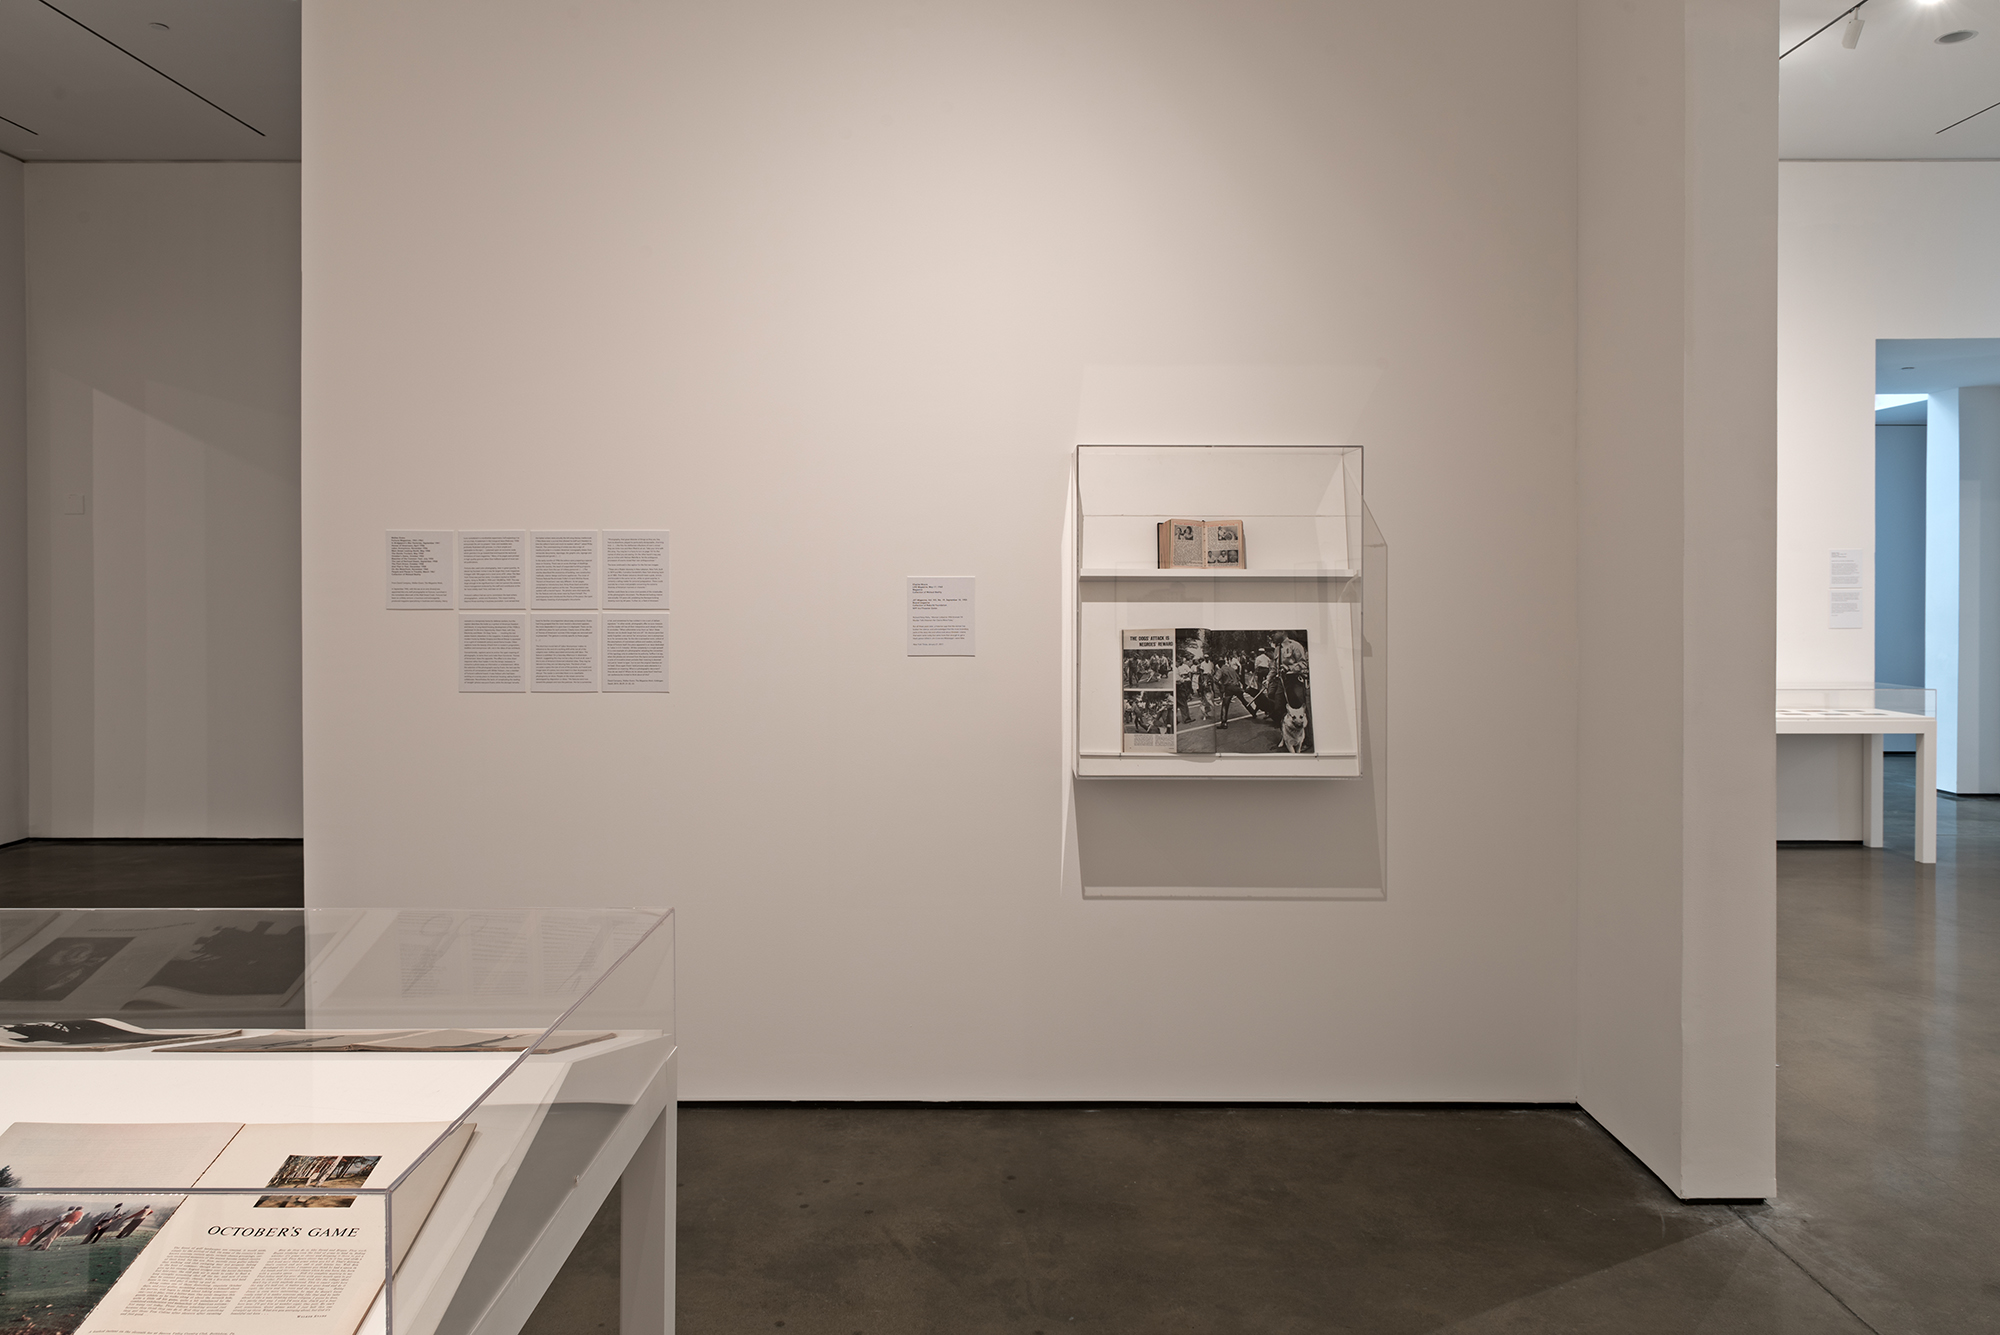   Picture Industry , Hessel Museum, Center for Curatorial Studies, Bard College, Annandale-on-Hudson, NY, 2017.     Walker Evans, JET Magazine, and Charles Moore    